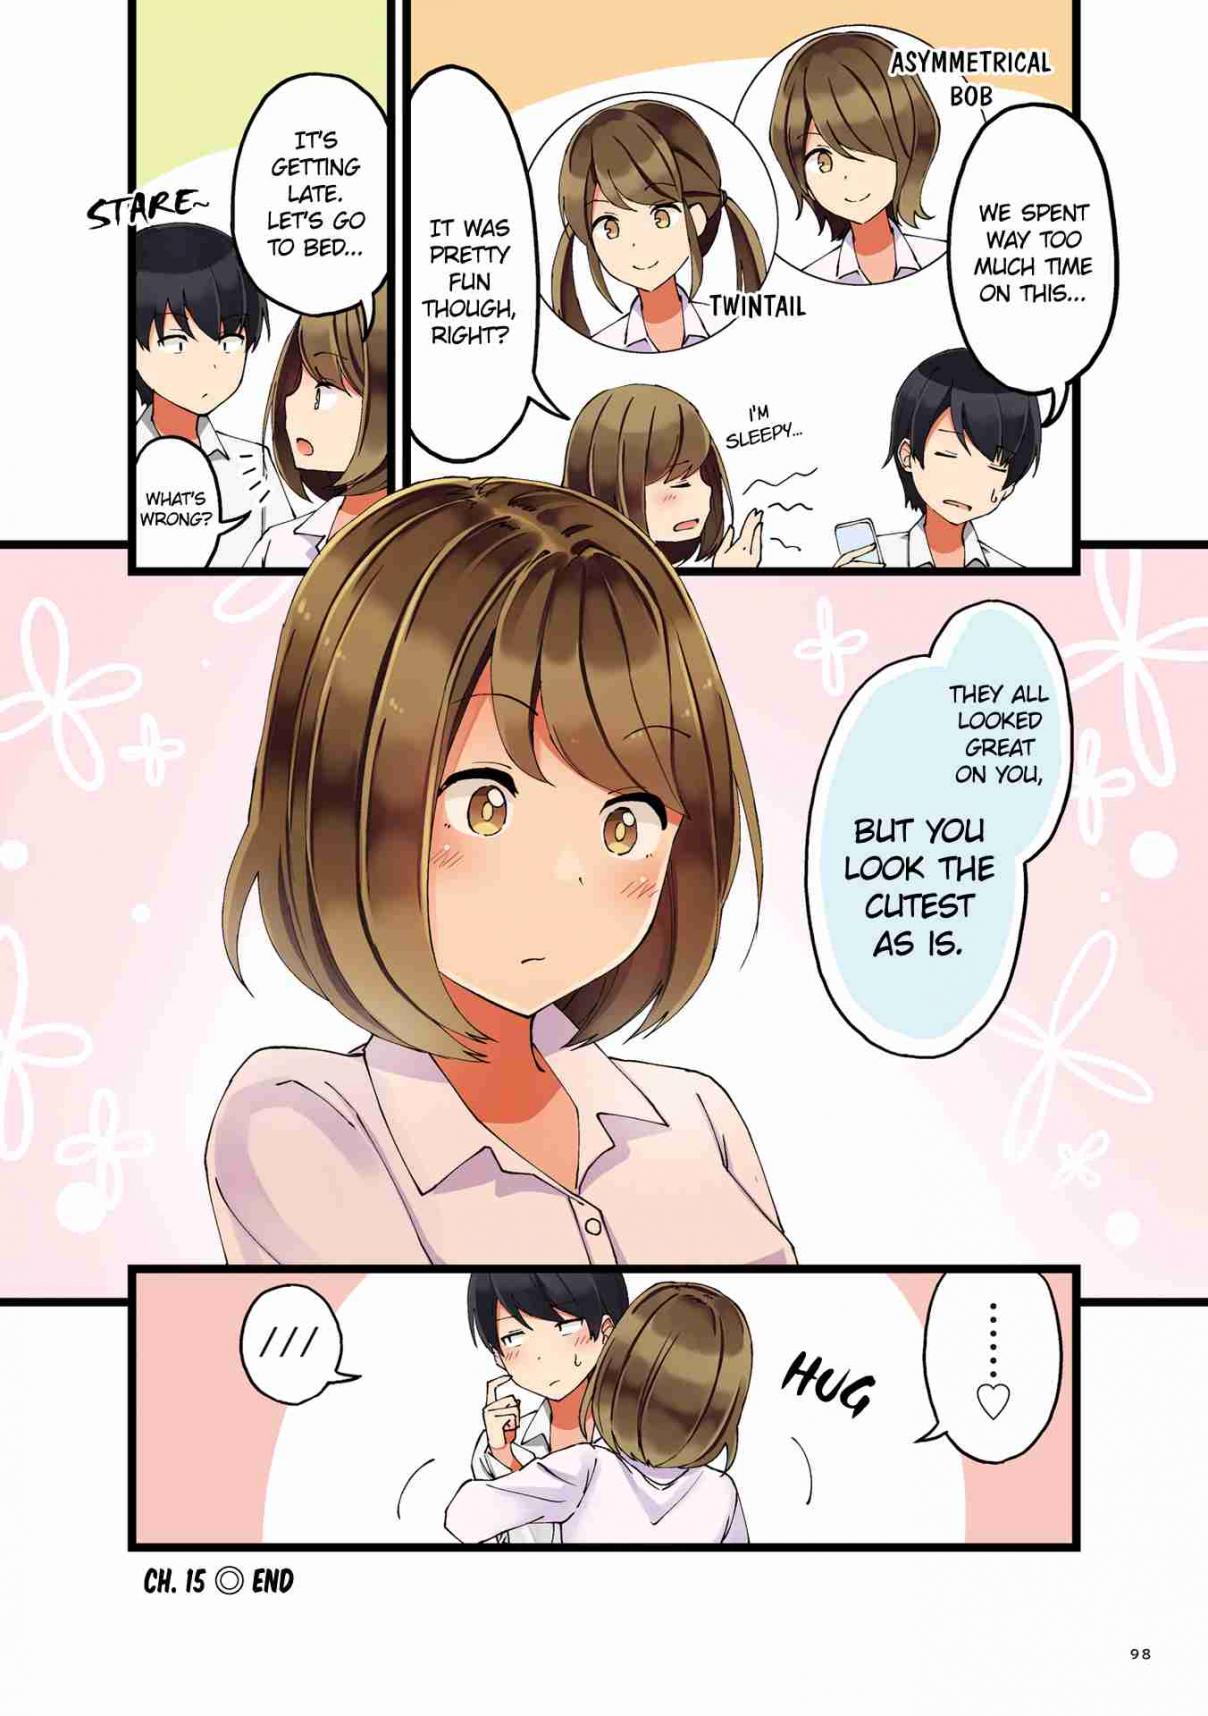 First Comes Love, Then Comes Marriage Vol. 1 Ch. 15 Searching For My Most Suitable Hairstyle